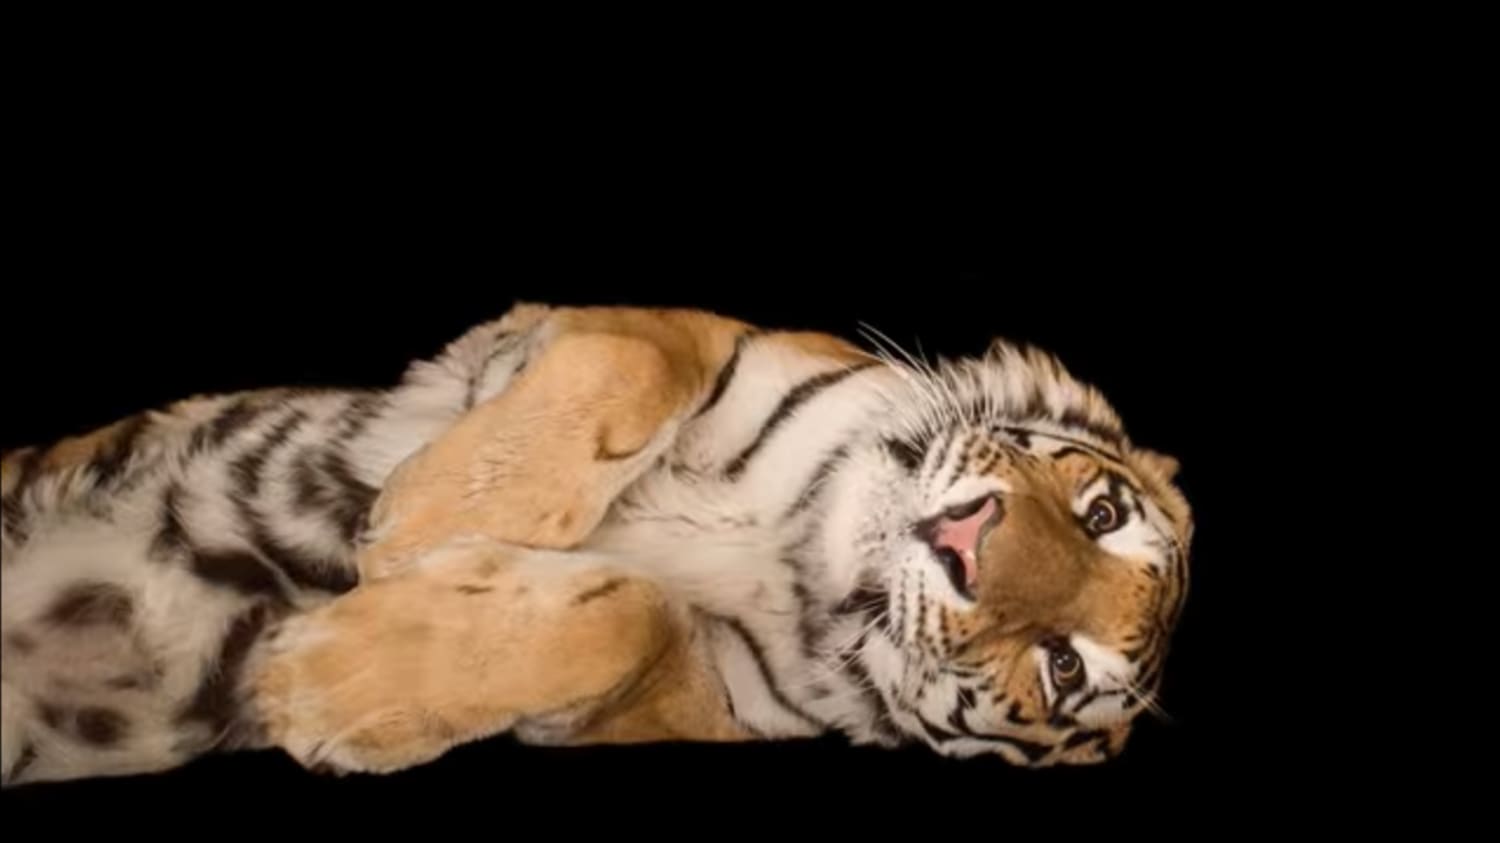 To Make a Tiger Photo-Ready, Just Spritz Some Perfume